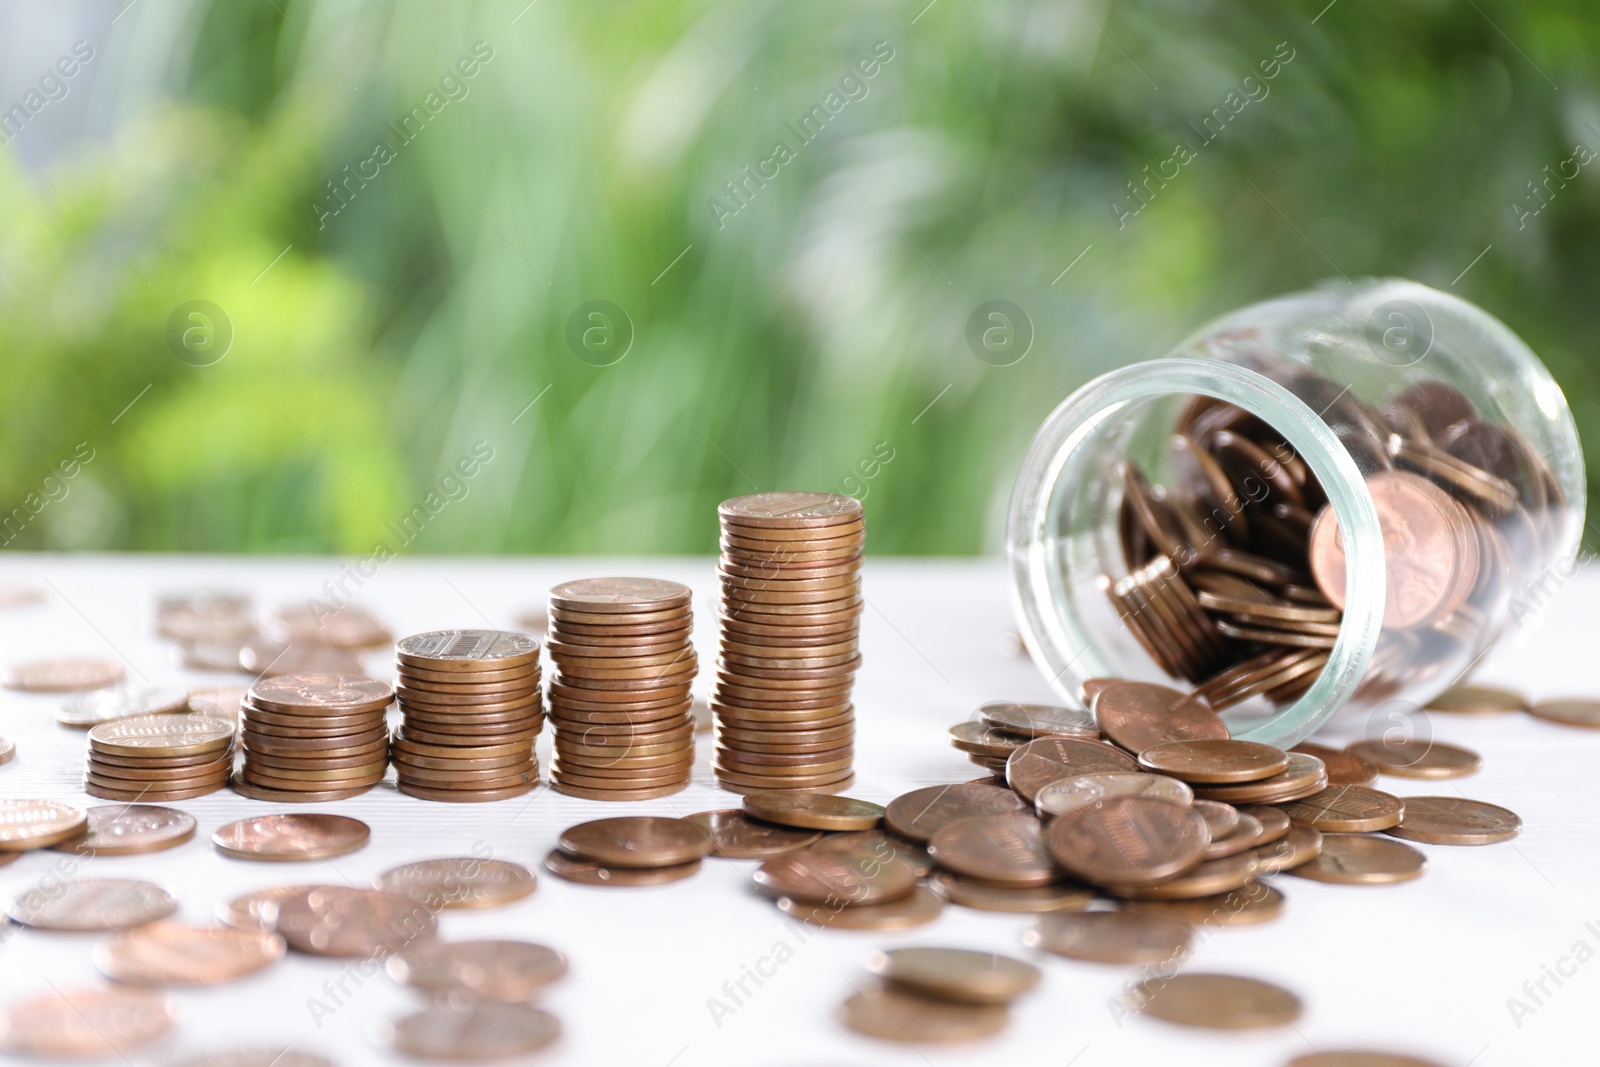 Photo of Overturned glass jar and metal coins on white table against blurred green background. Space for text